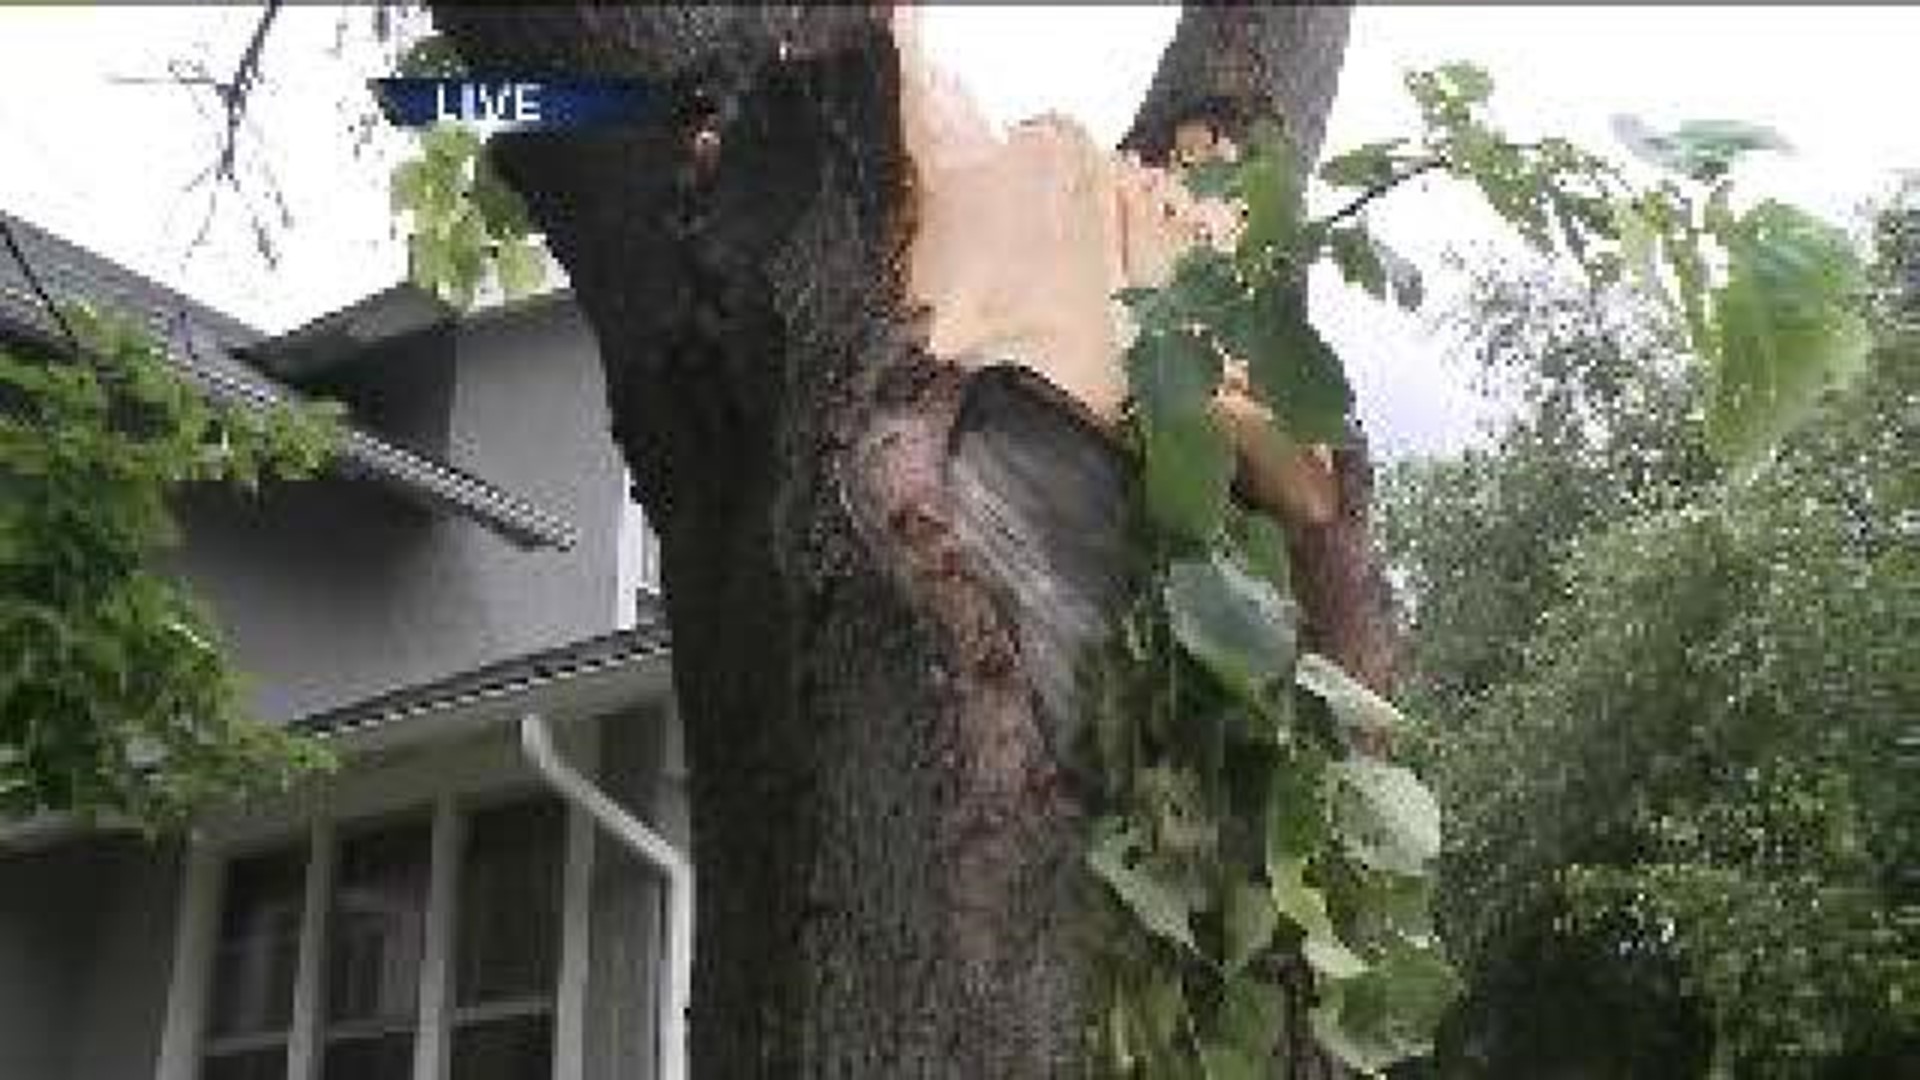 Trees down on the street after storms in Davenport